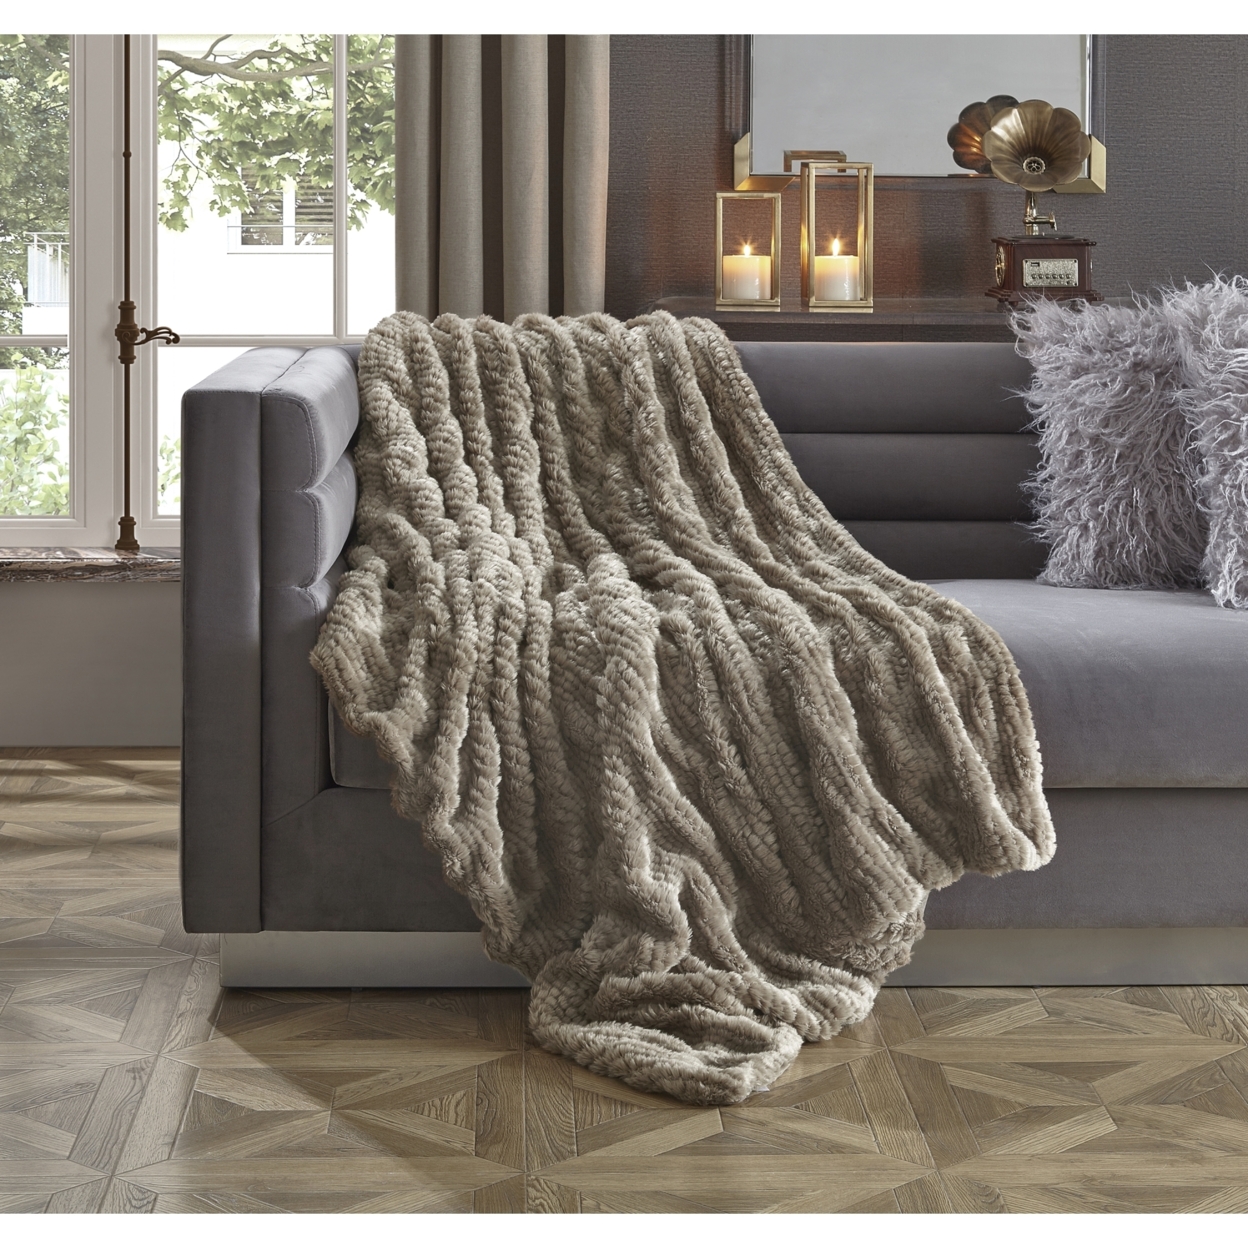 Noelia Throw-Extra Soft, Silk Touch-Honeycomb Texture-Exceptionally Cozy - Brown